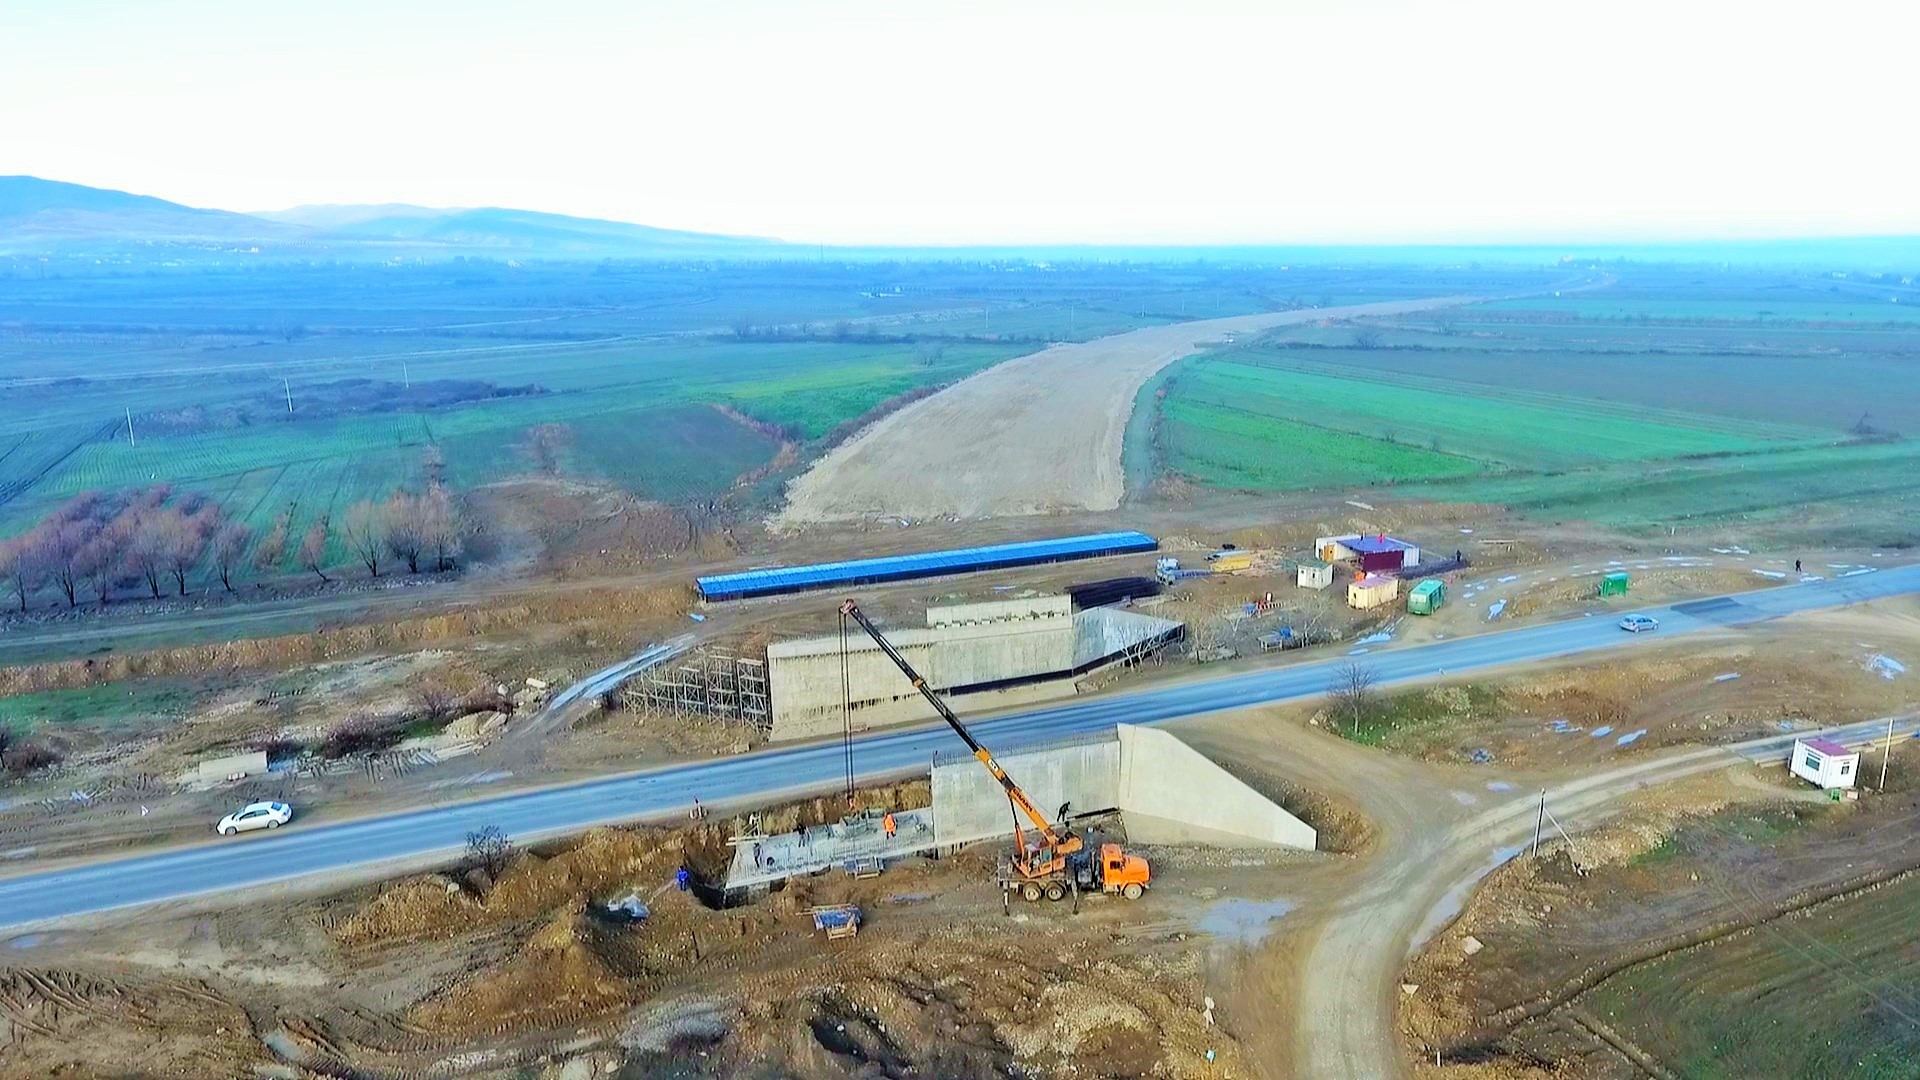 Azerbaijan completes construction work on first section of Baku - border with Russia toll highway